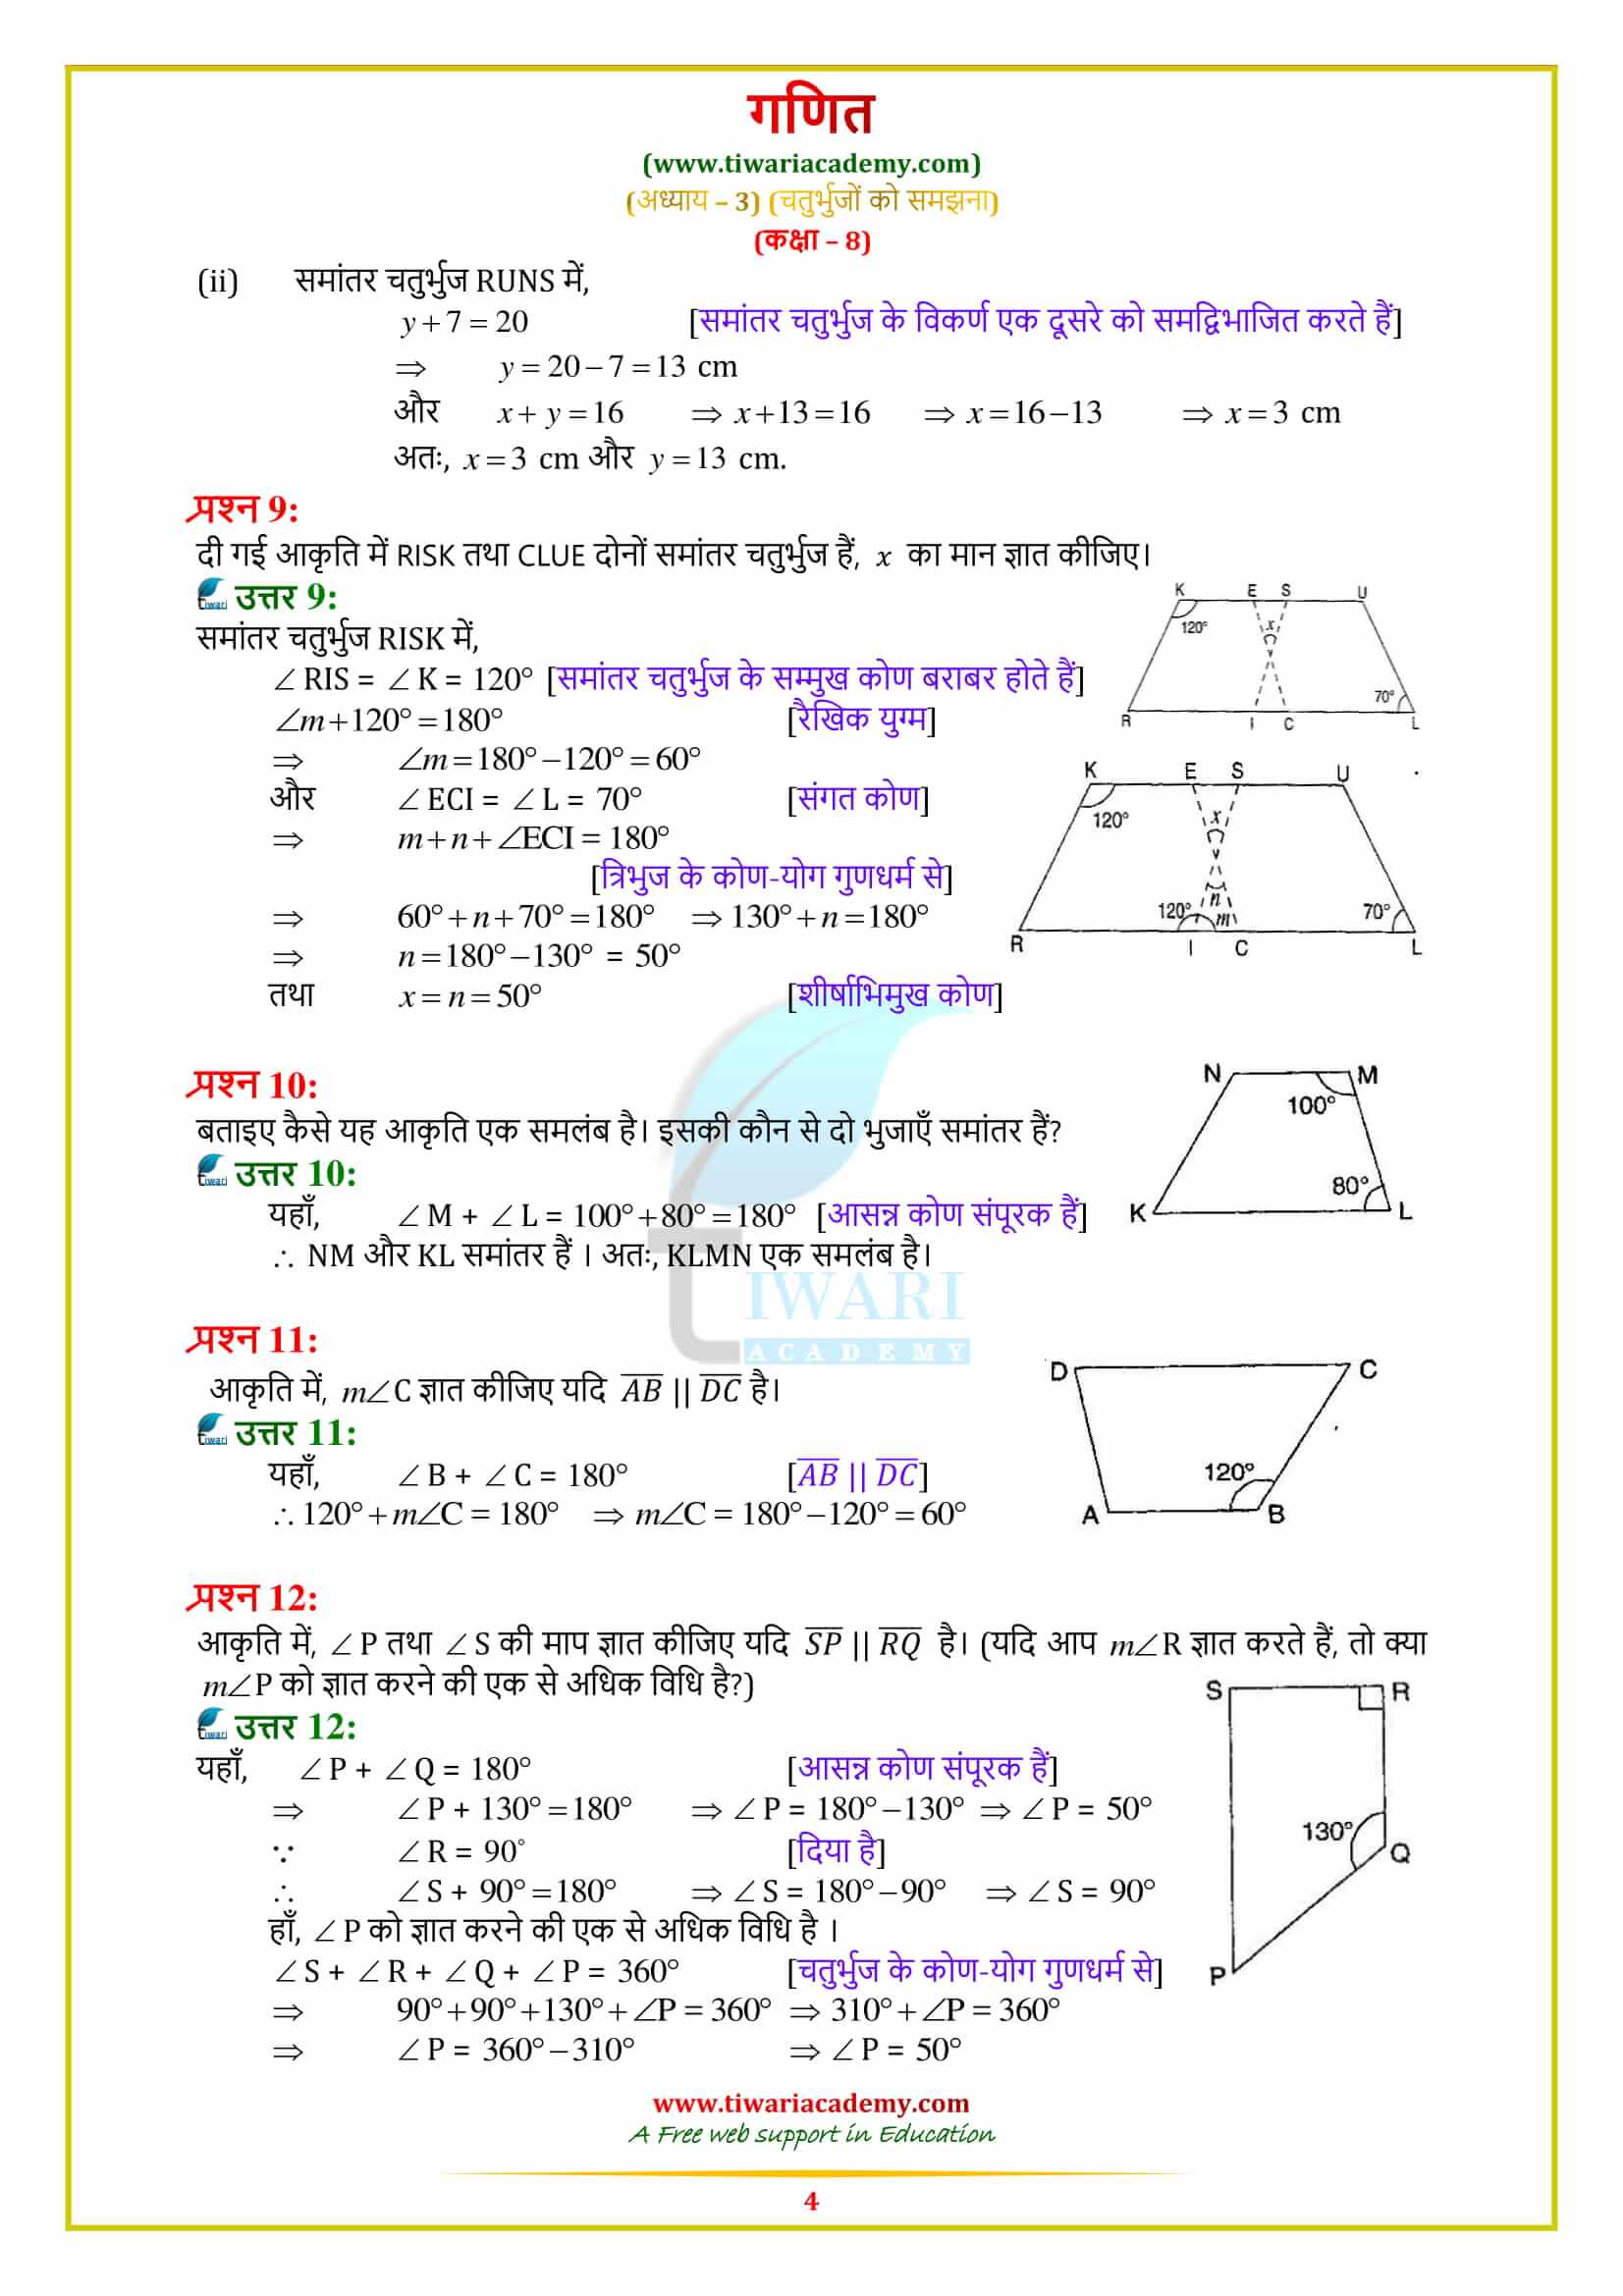 8 Maths solutions Exercise 3.3 in pdf form free download